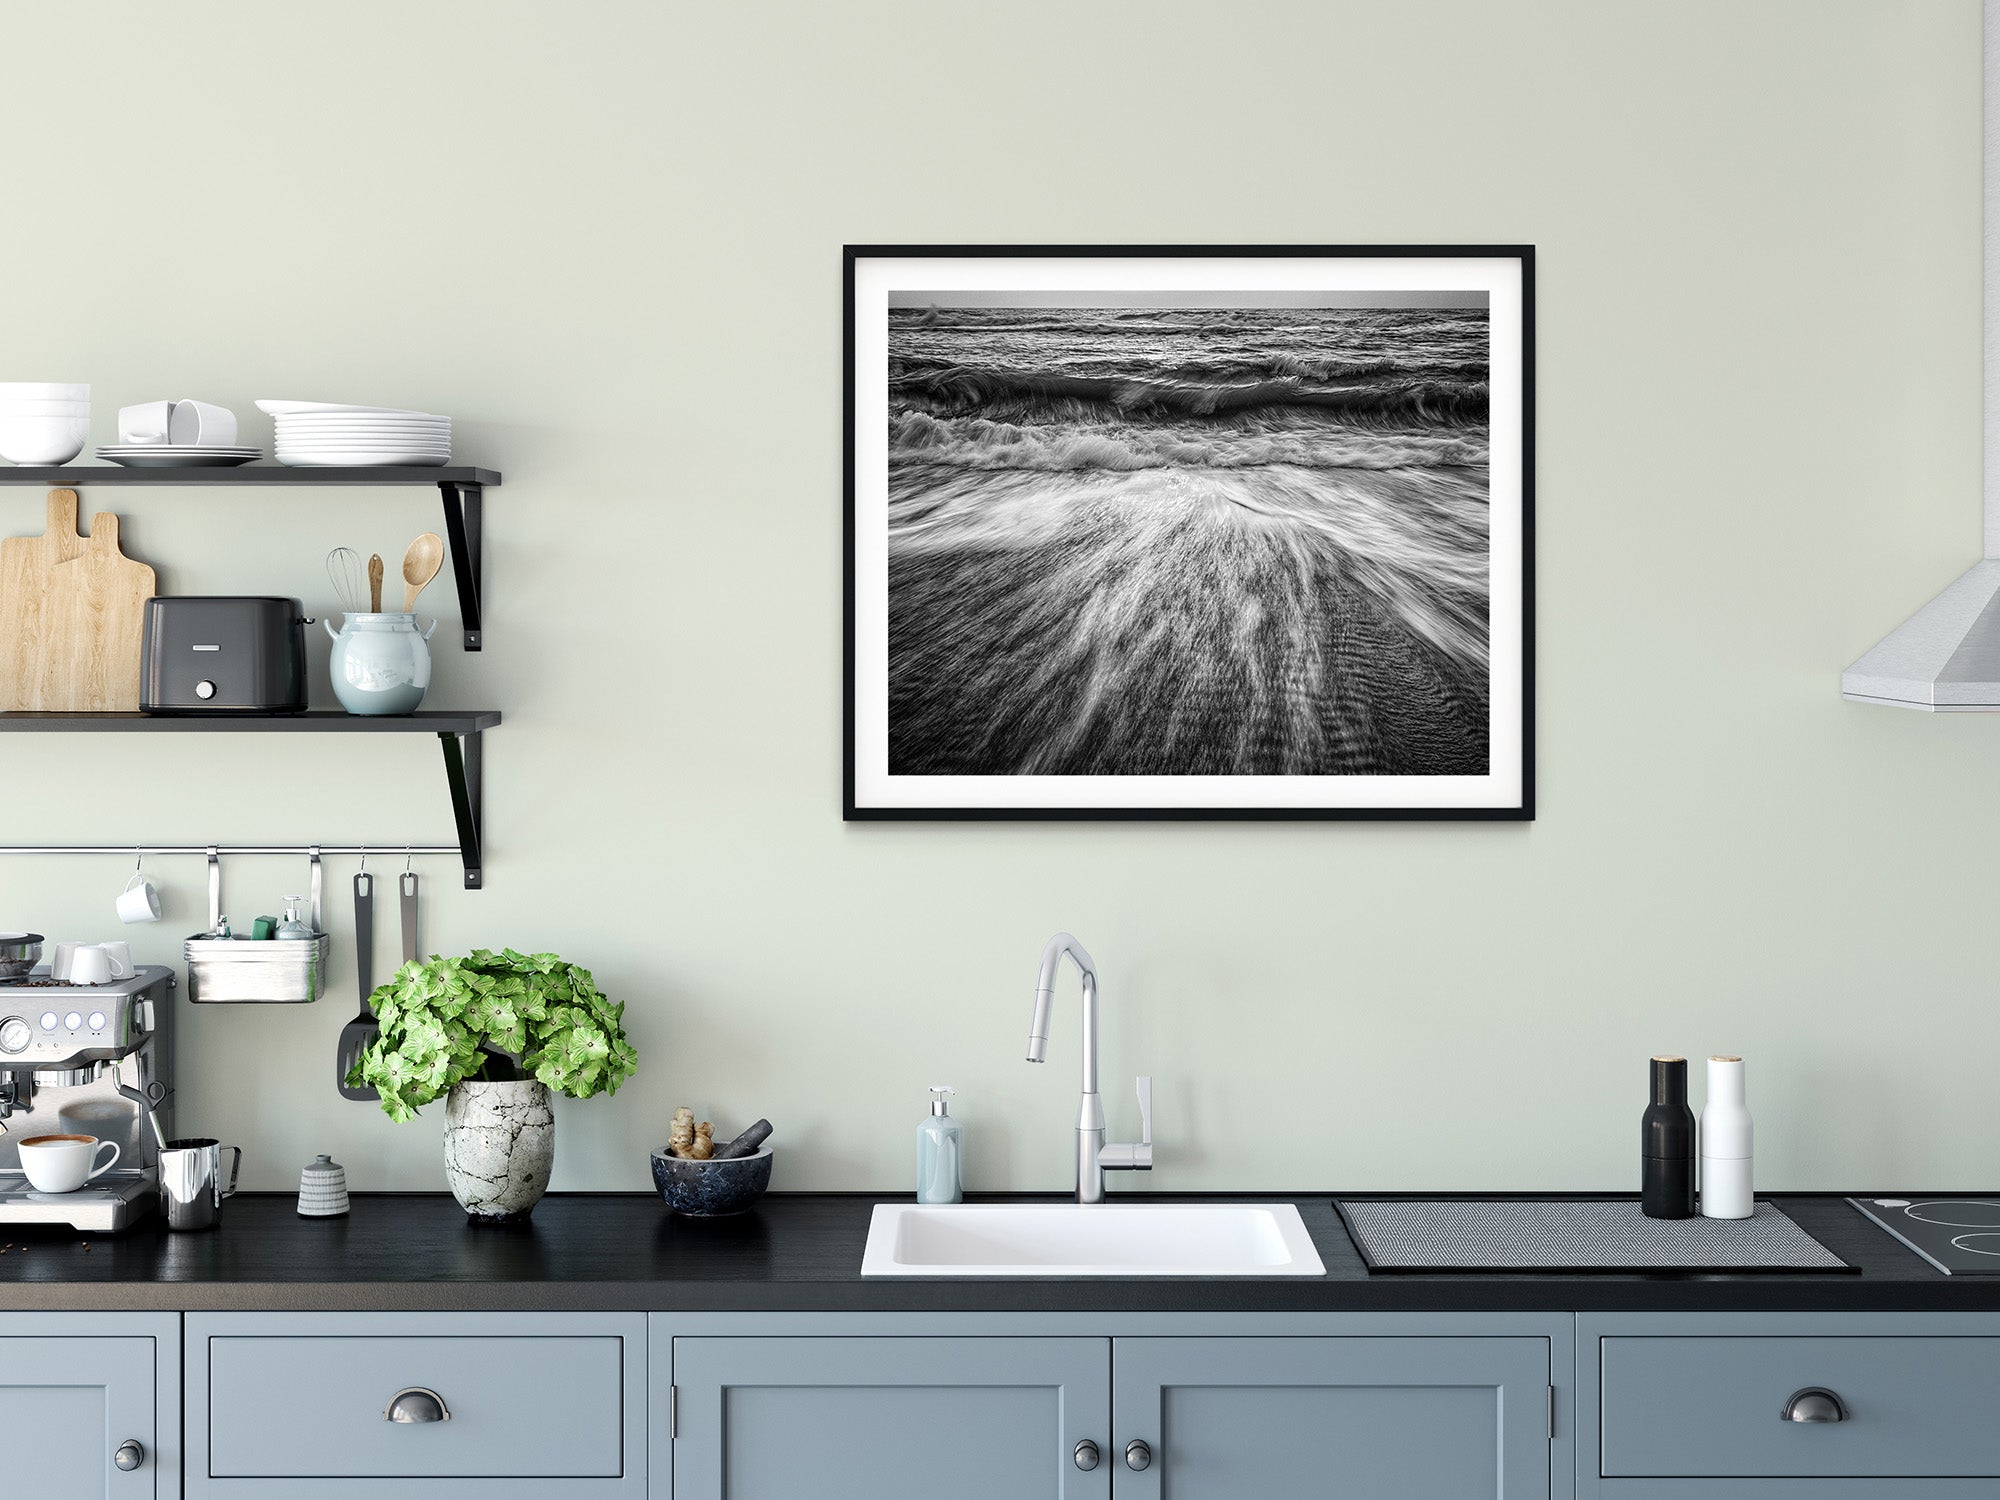 Black And White Wall Art Print Pictures For the Home and Office For Sale Online